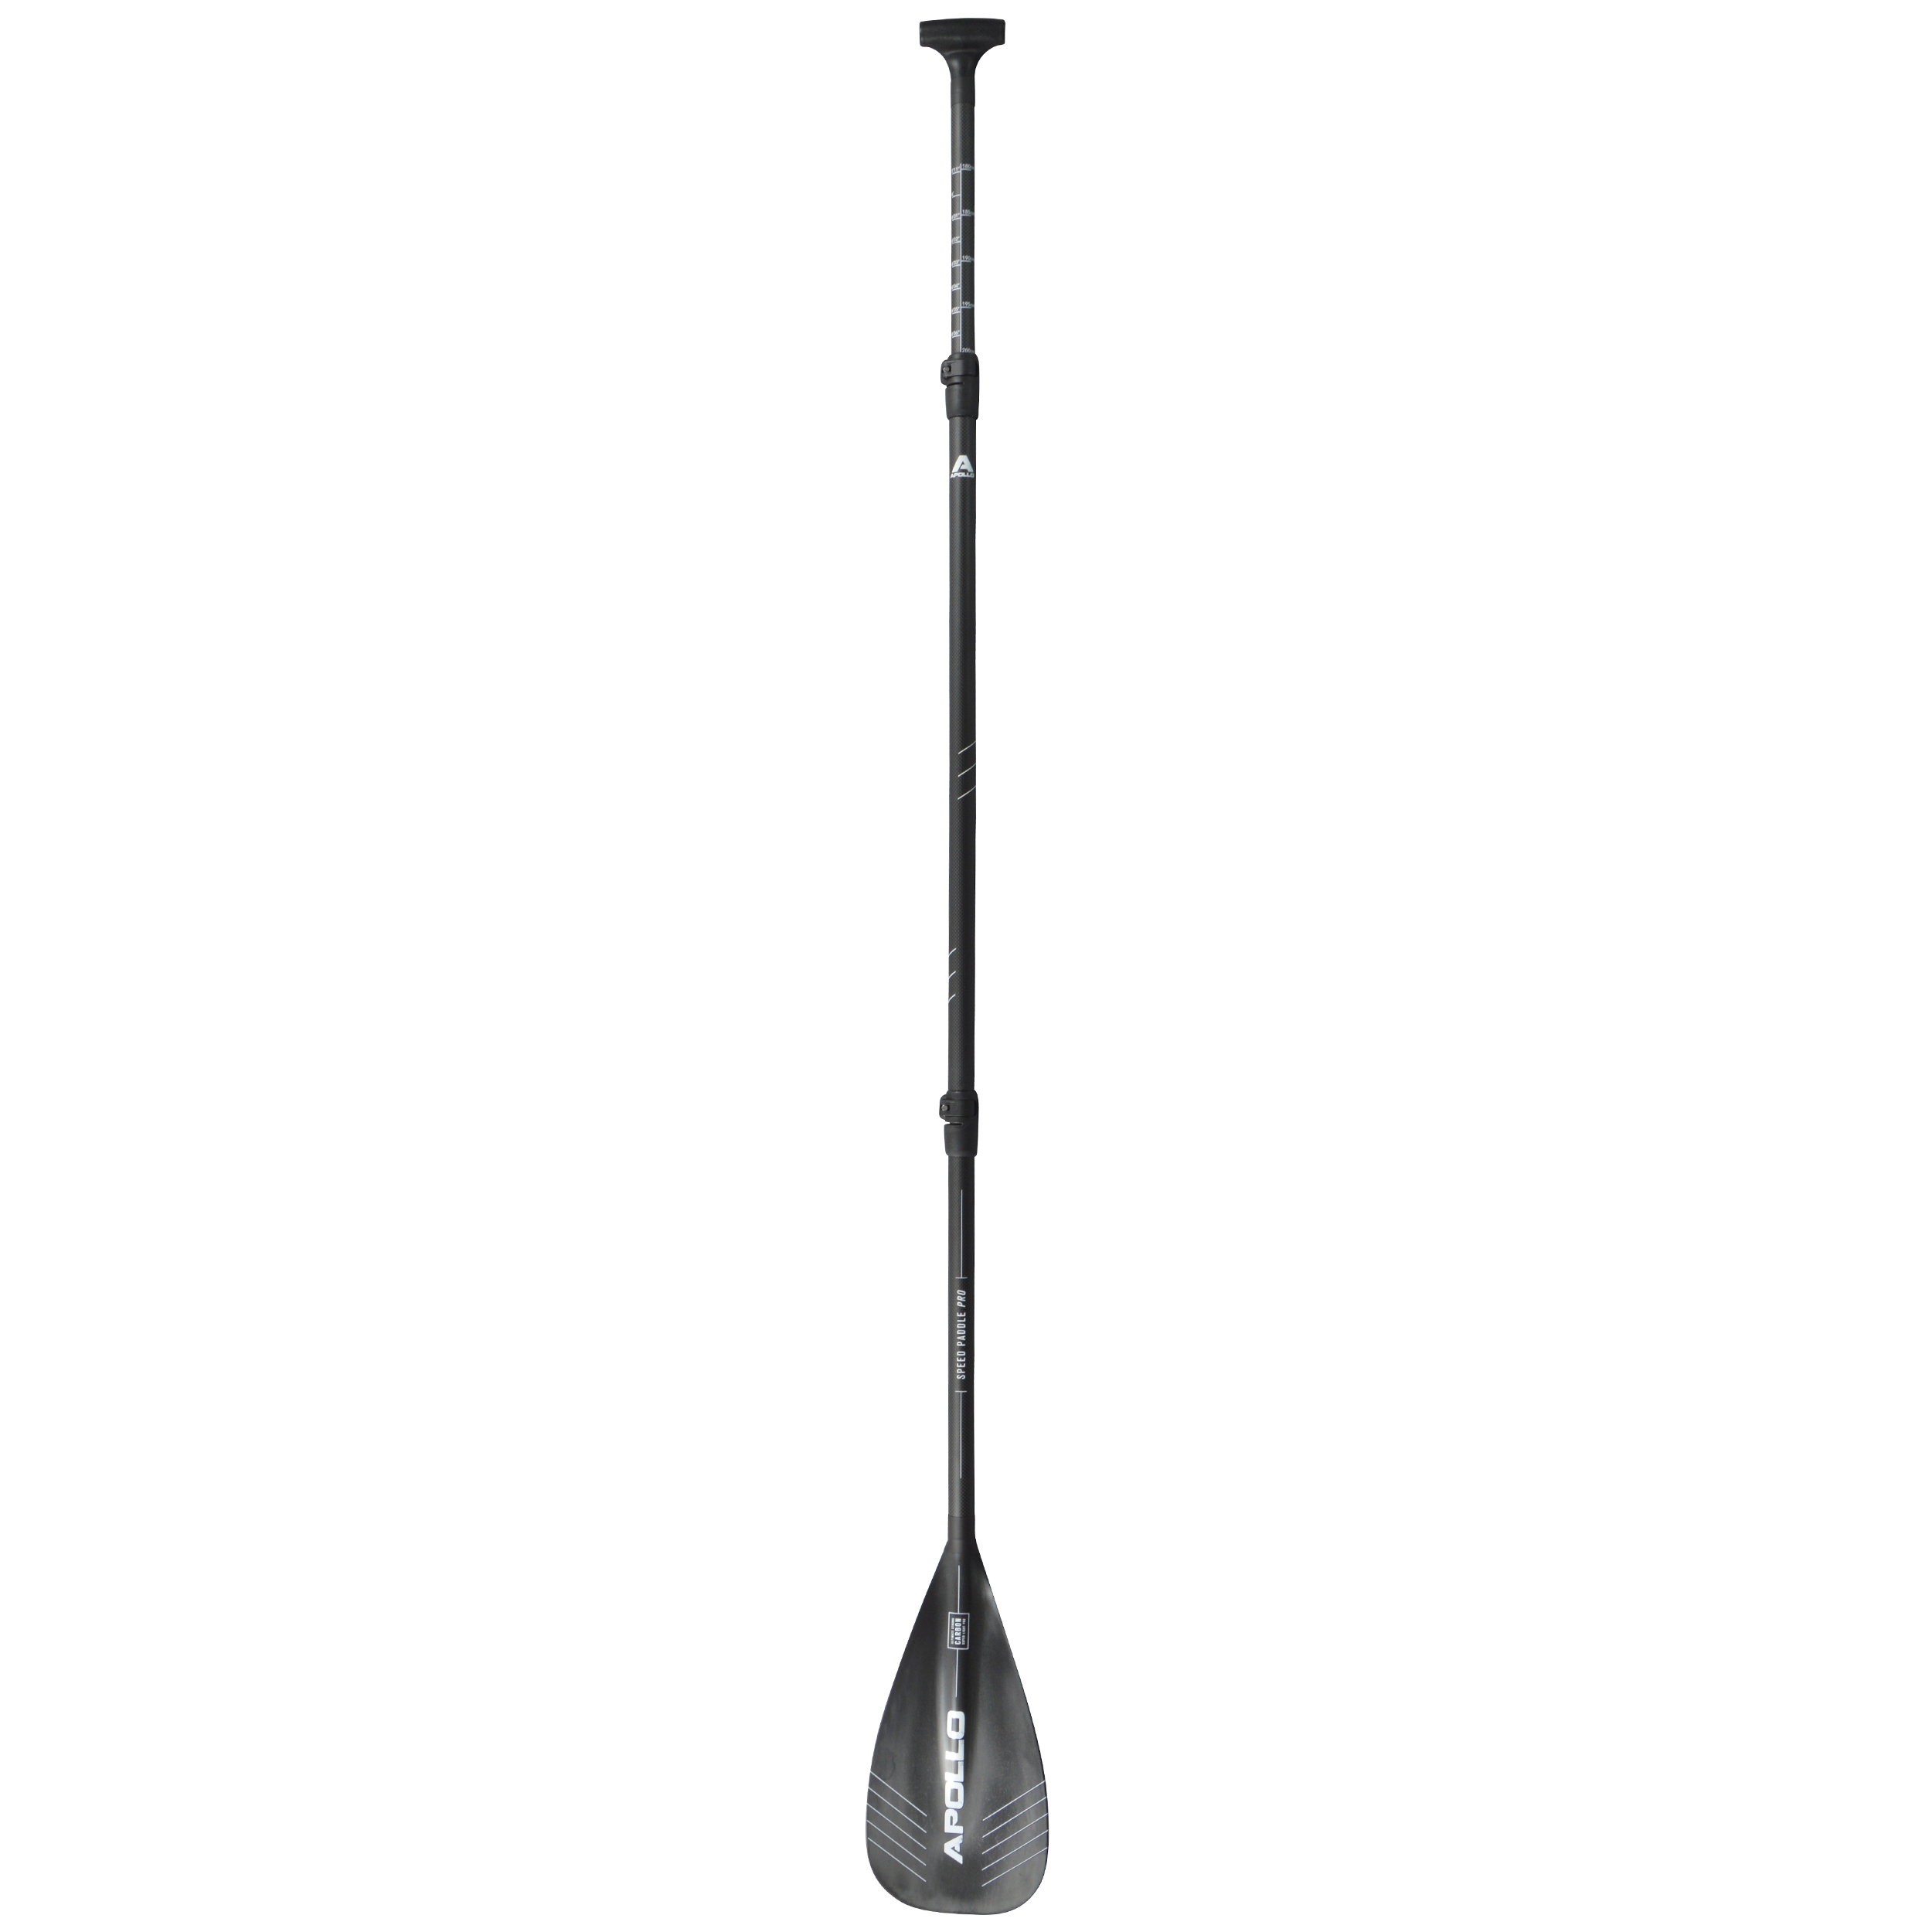 Apollo Speed Paddle Pro, SUP Paddel, 3-teiliges Paddel für Stand-Up-Paddling